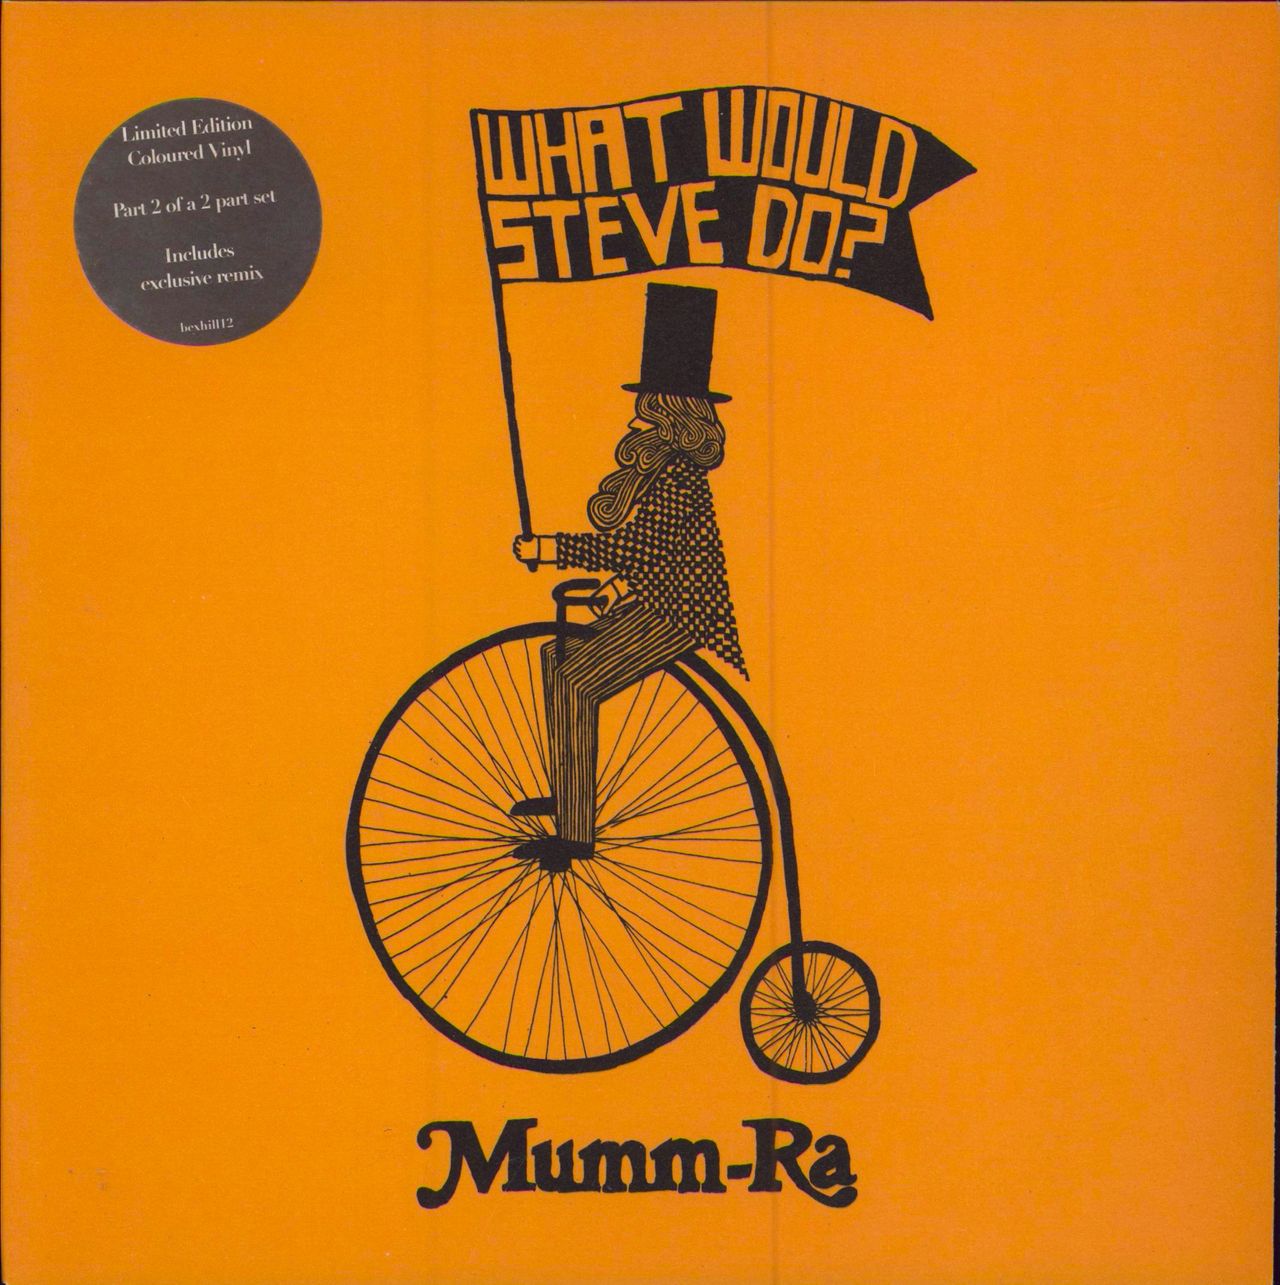 Mumm-Ra What Would Steve Do? - Double pack UK 7" vinyl single (7 inch record / 45)